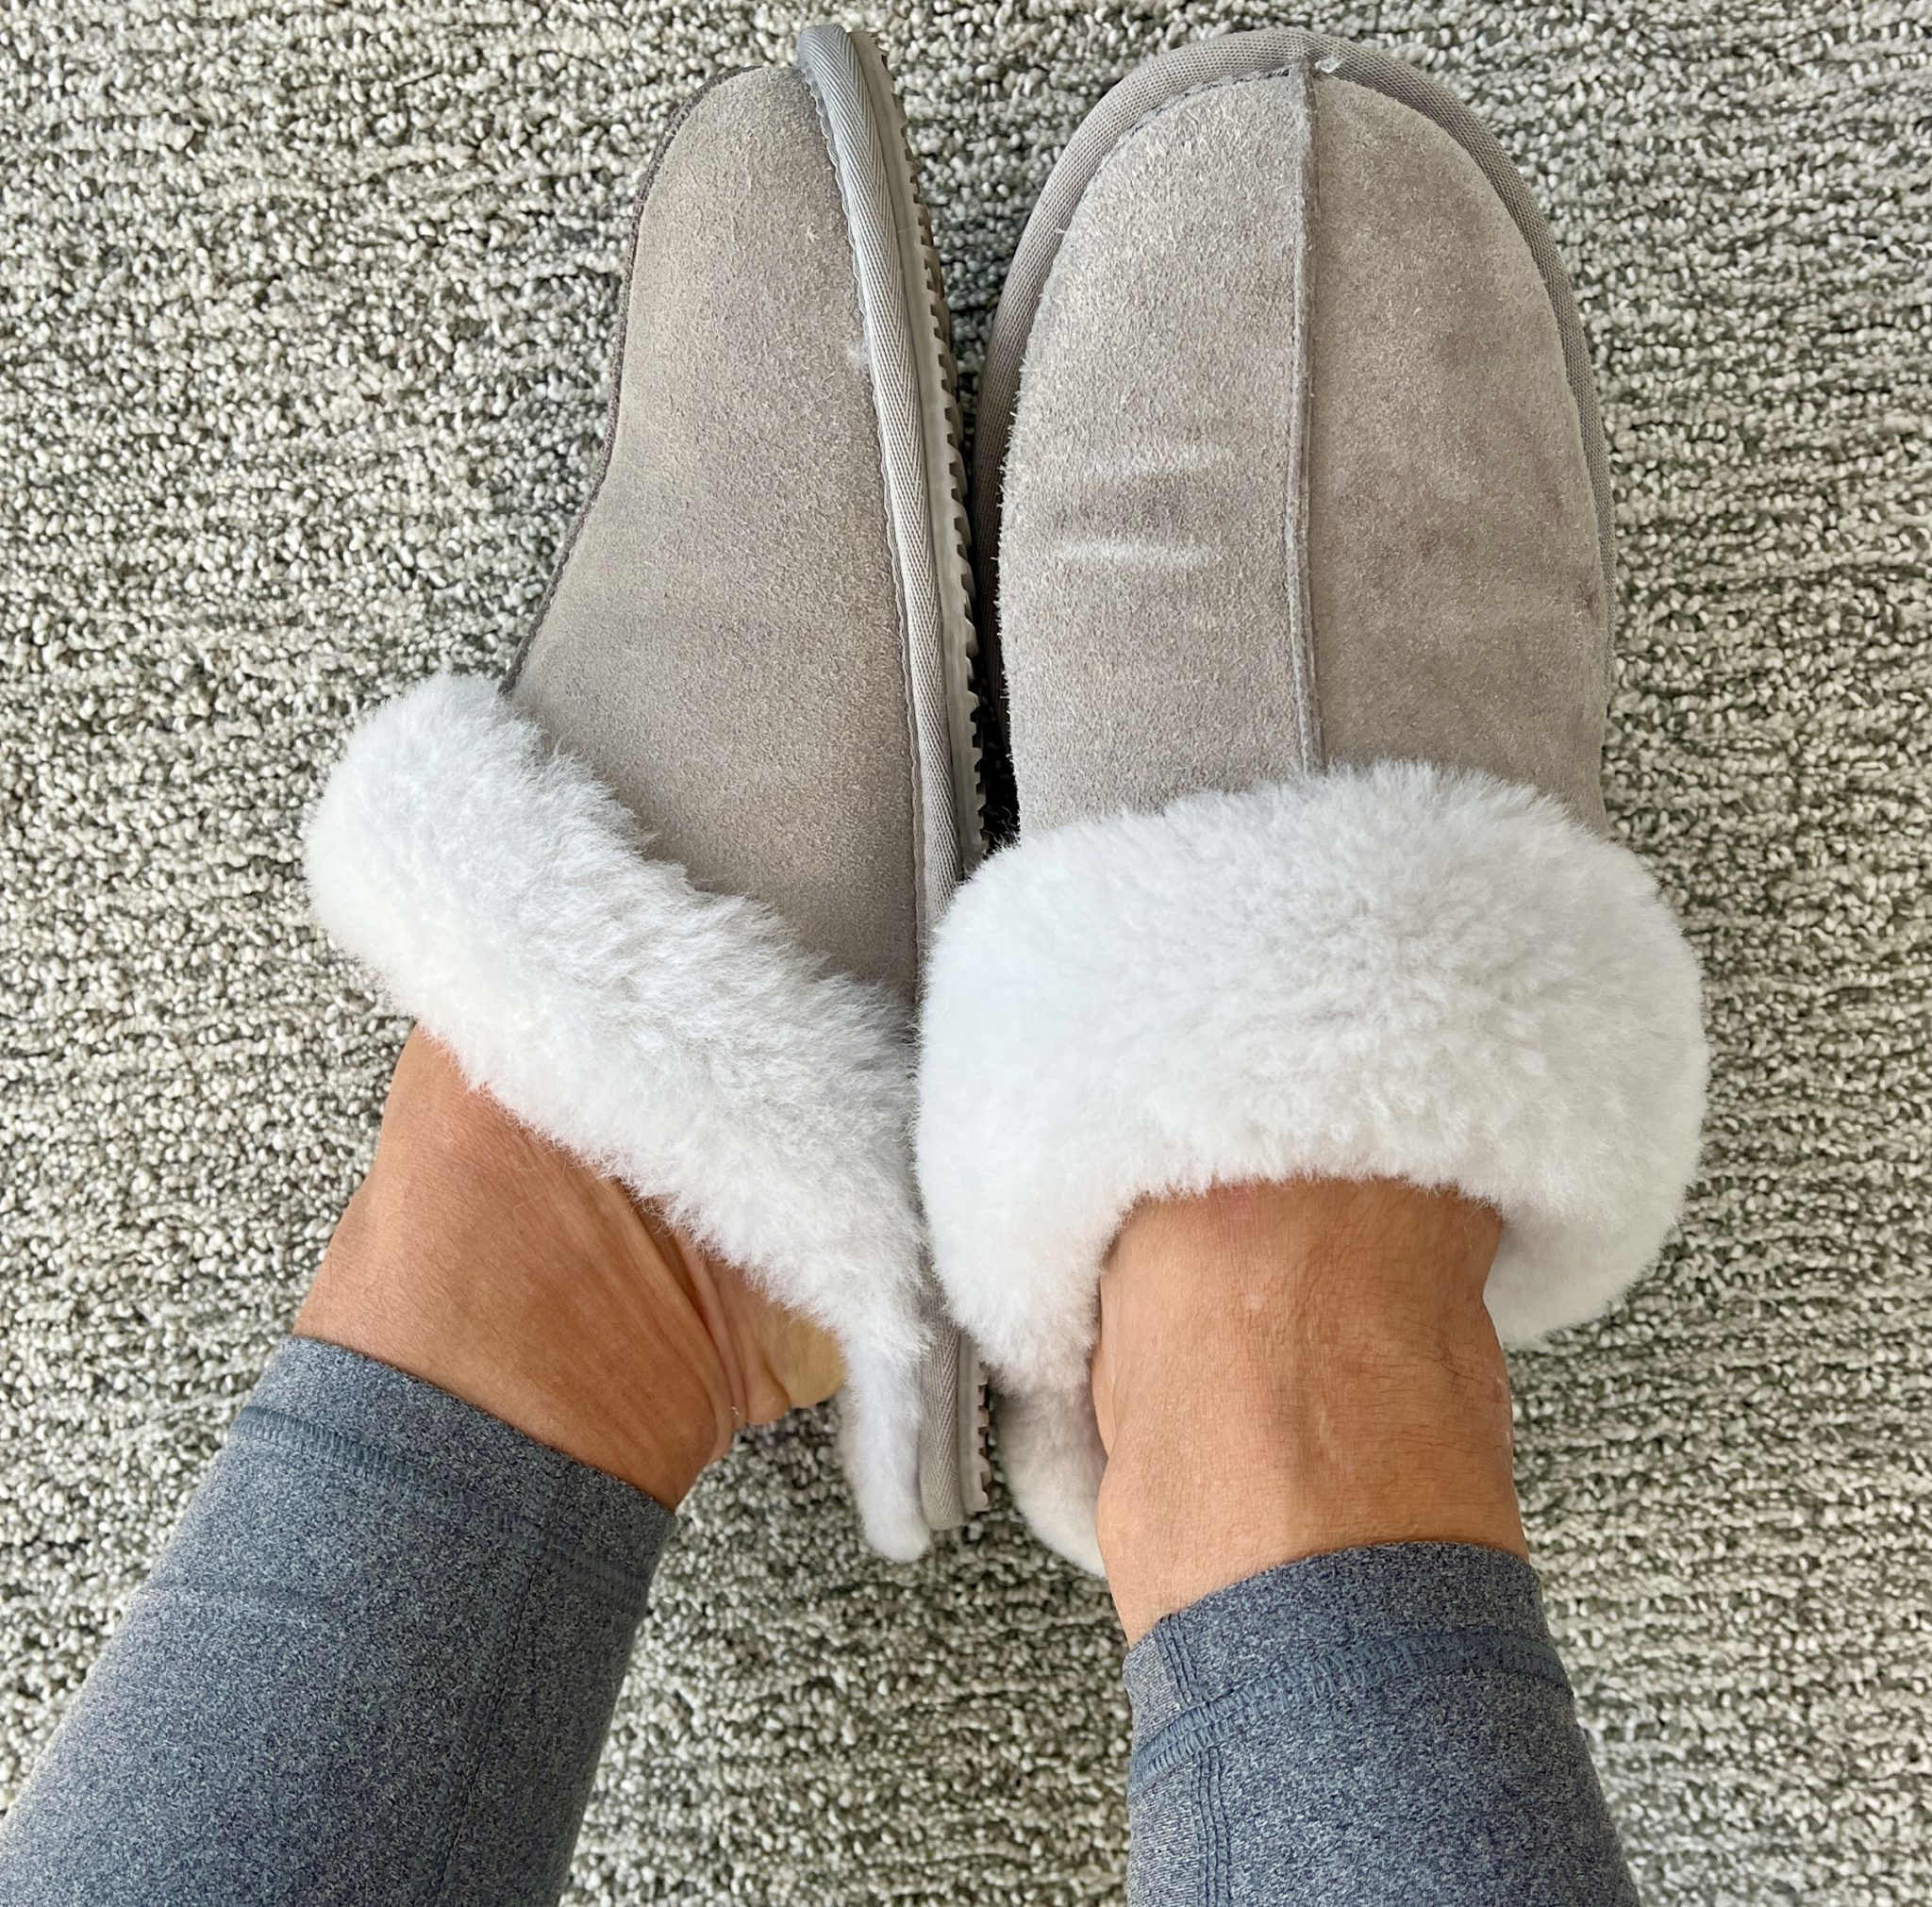 Quince shearling slippers are a great gift